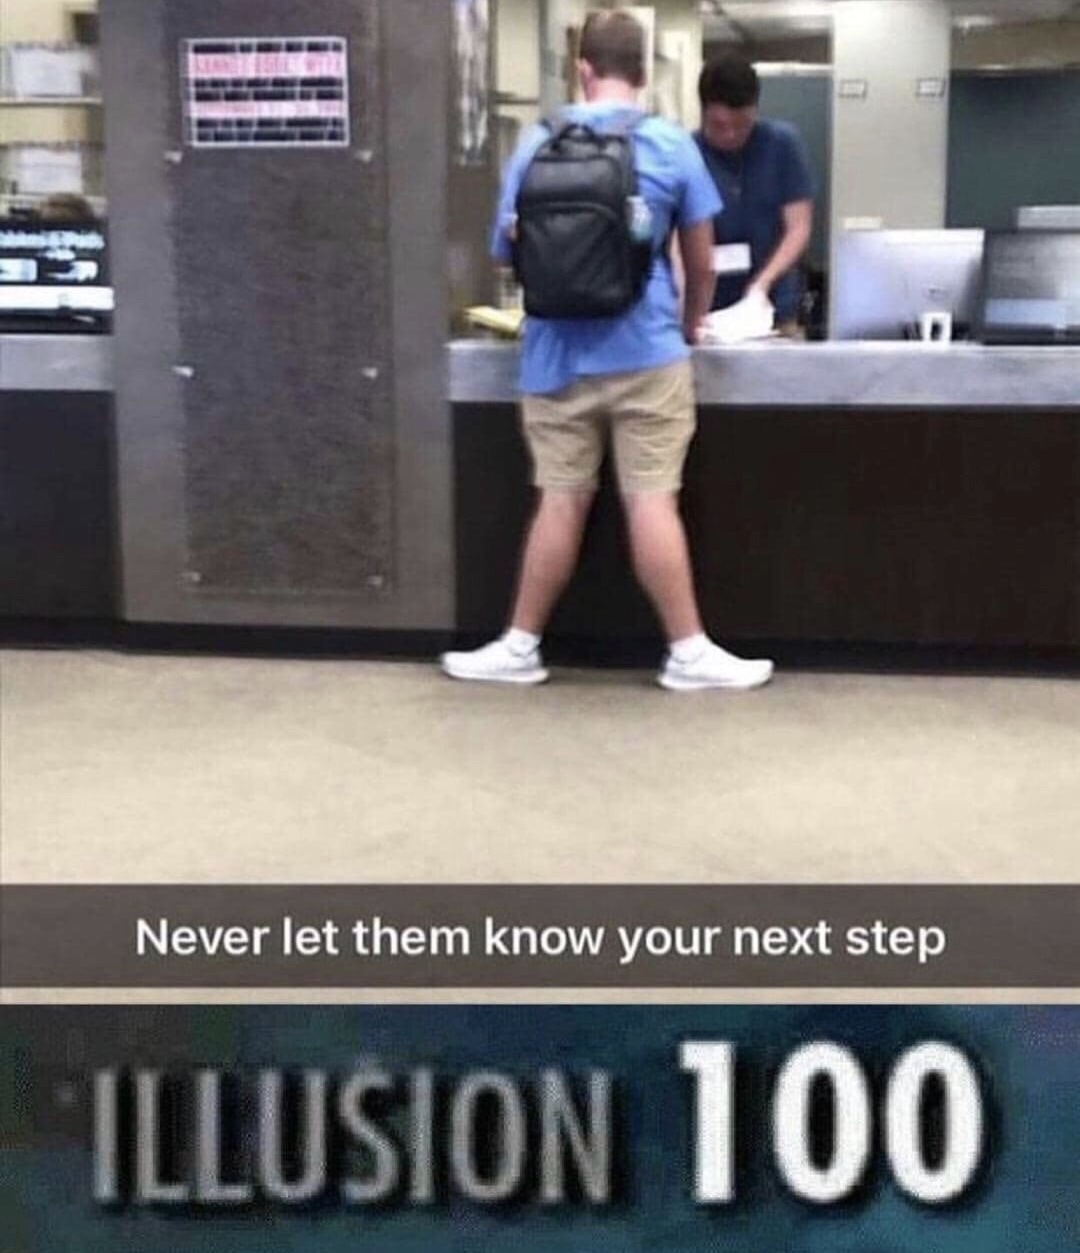 never let them know your next step meme - Never let them know your next step Illusion 100